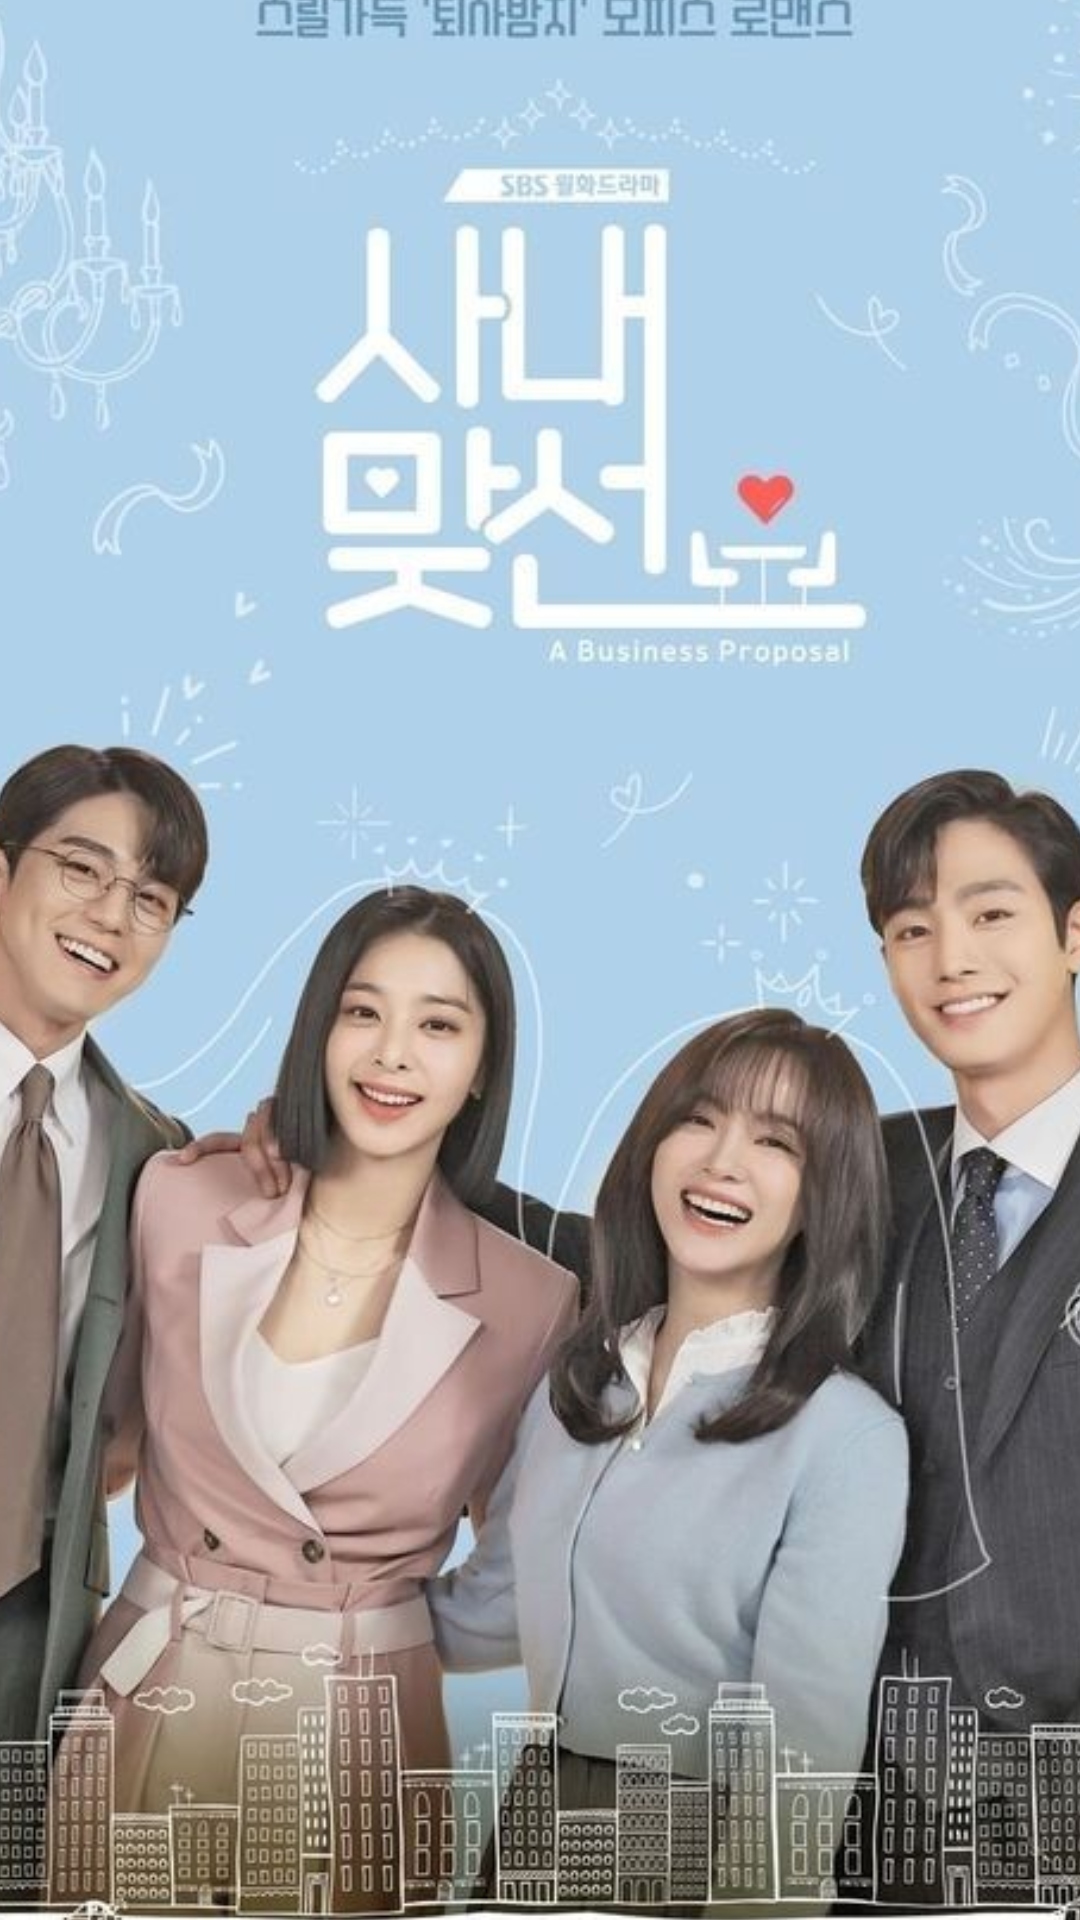 Missing Business Proposal? Here are similar 7 K-Dramas you can add to your watchlist